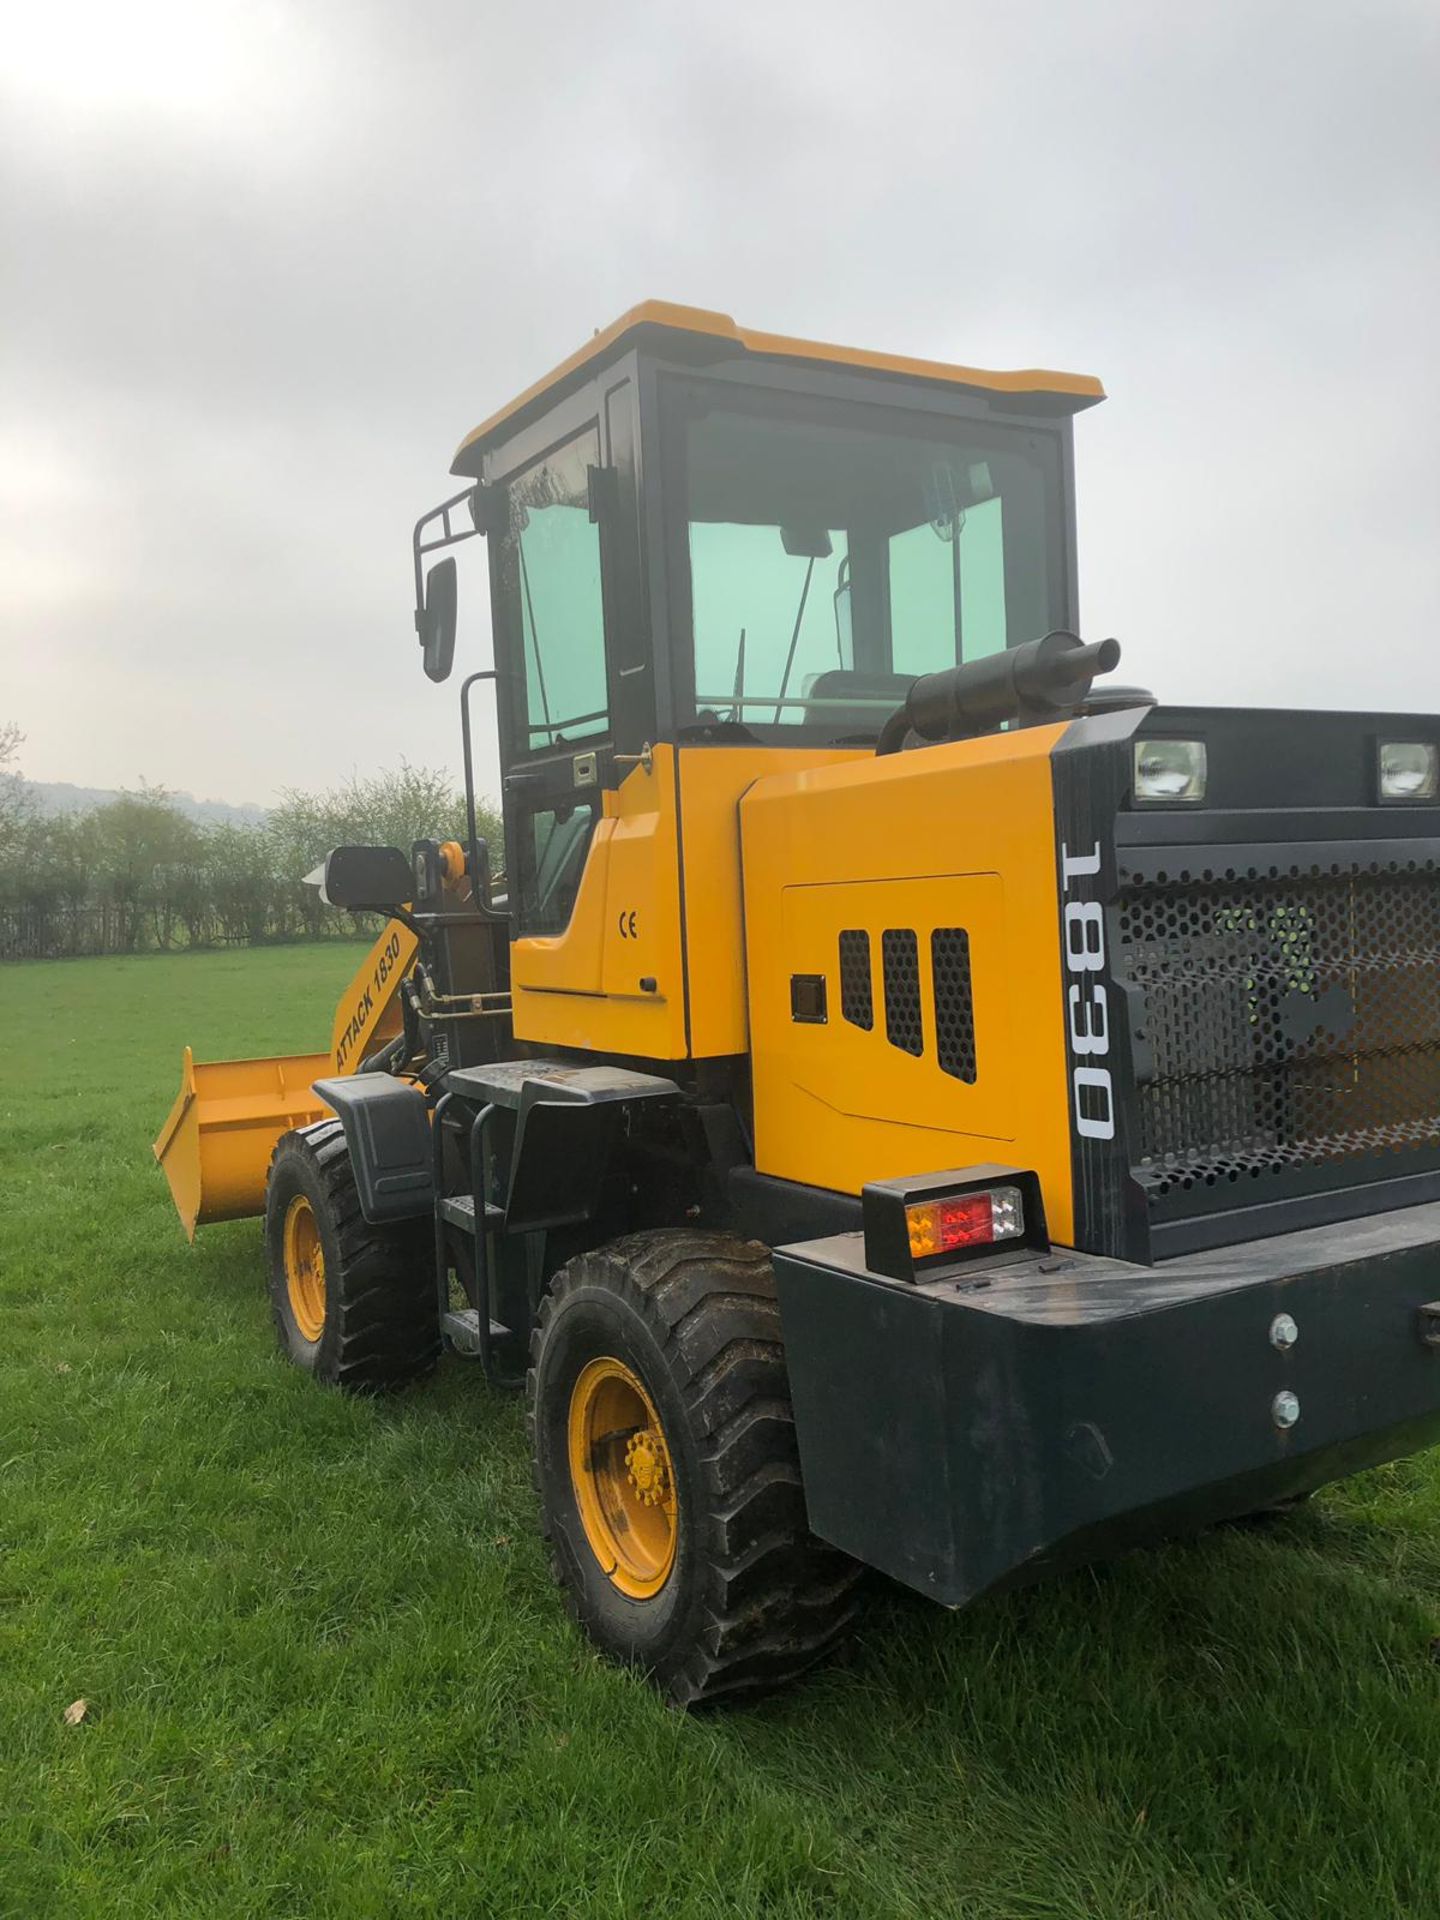 2019 BRAND NEW AND UNUSED ATTACK 1830 WHEEL LOADER, RUNS WORKS AND LIFTS *PLUS VAT* - Image 3 of 8